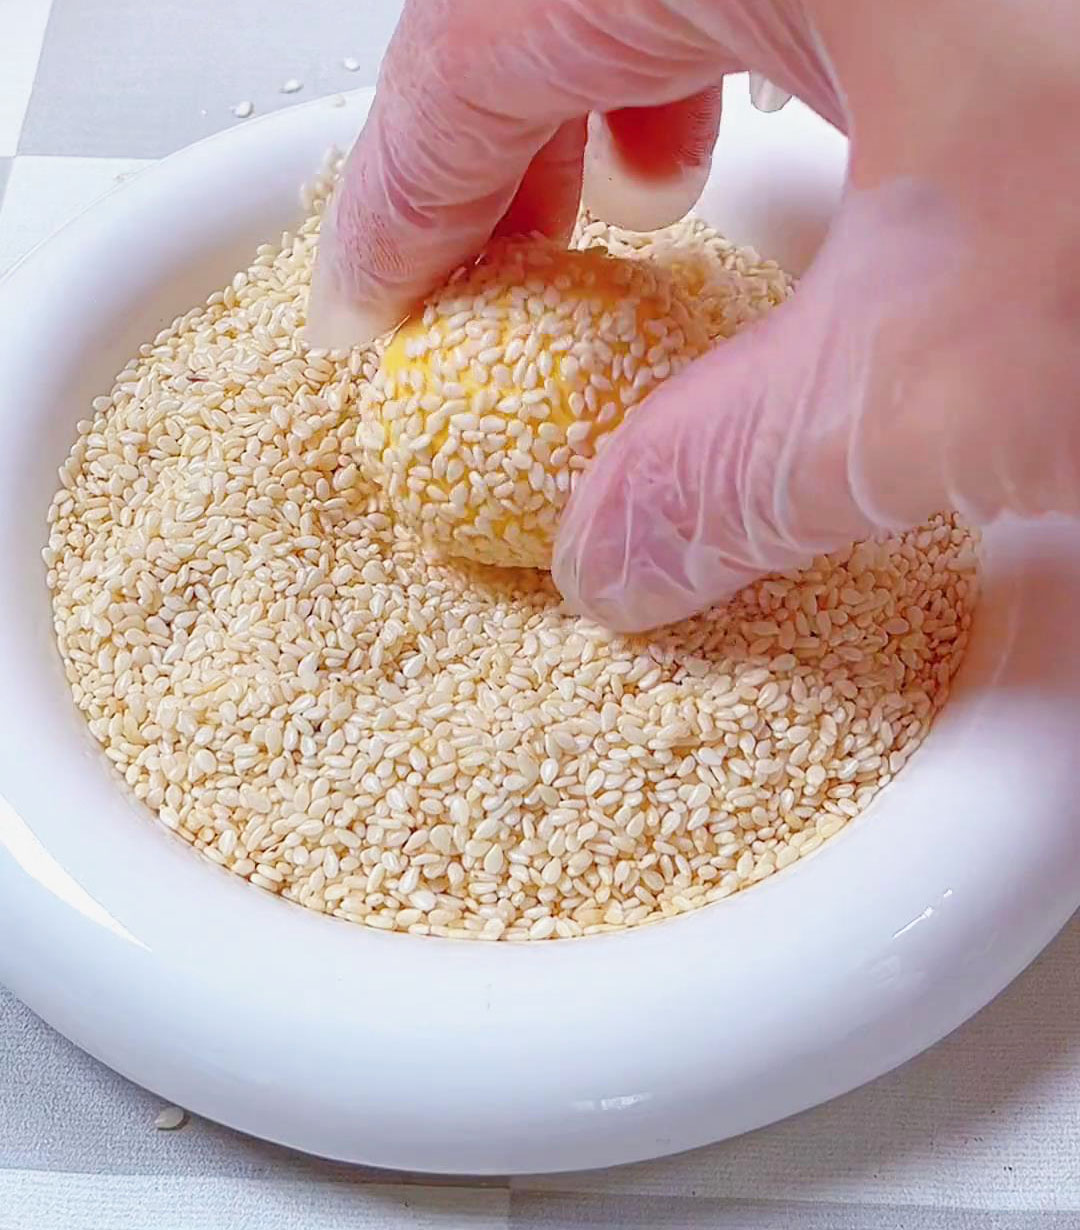 coat the ball with white sesame seeds